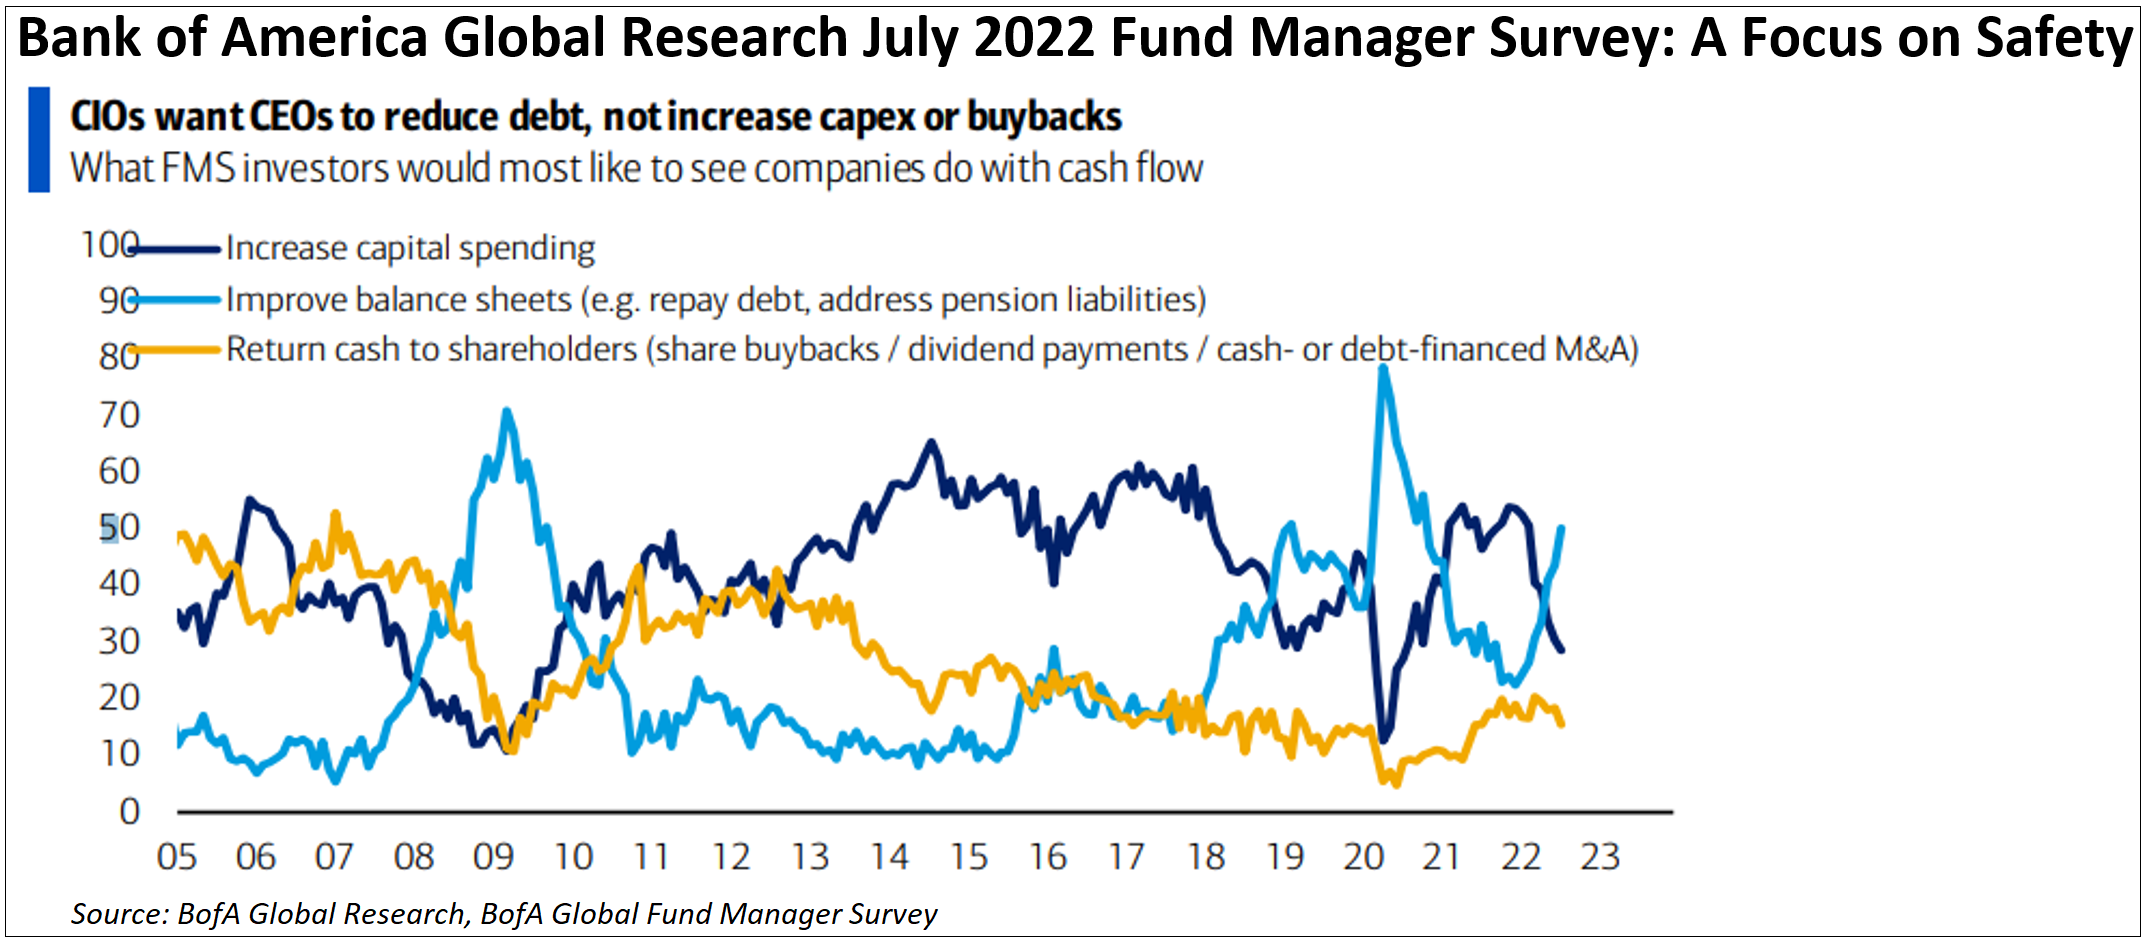 bank-of-america-global-research-july-2022-fund-manager-survey